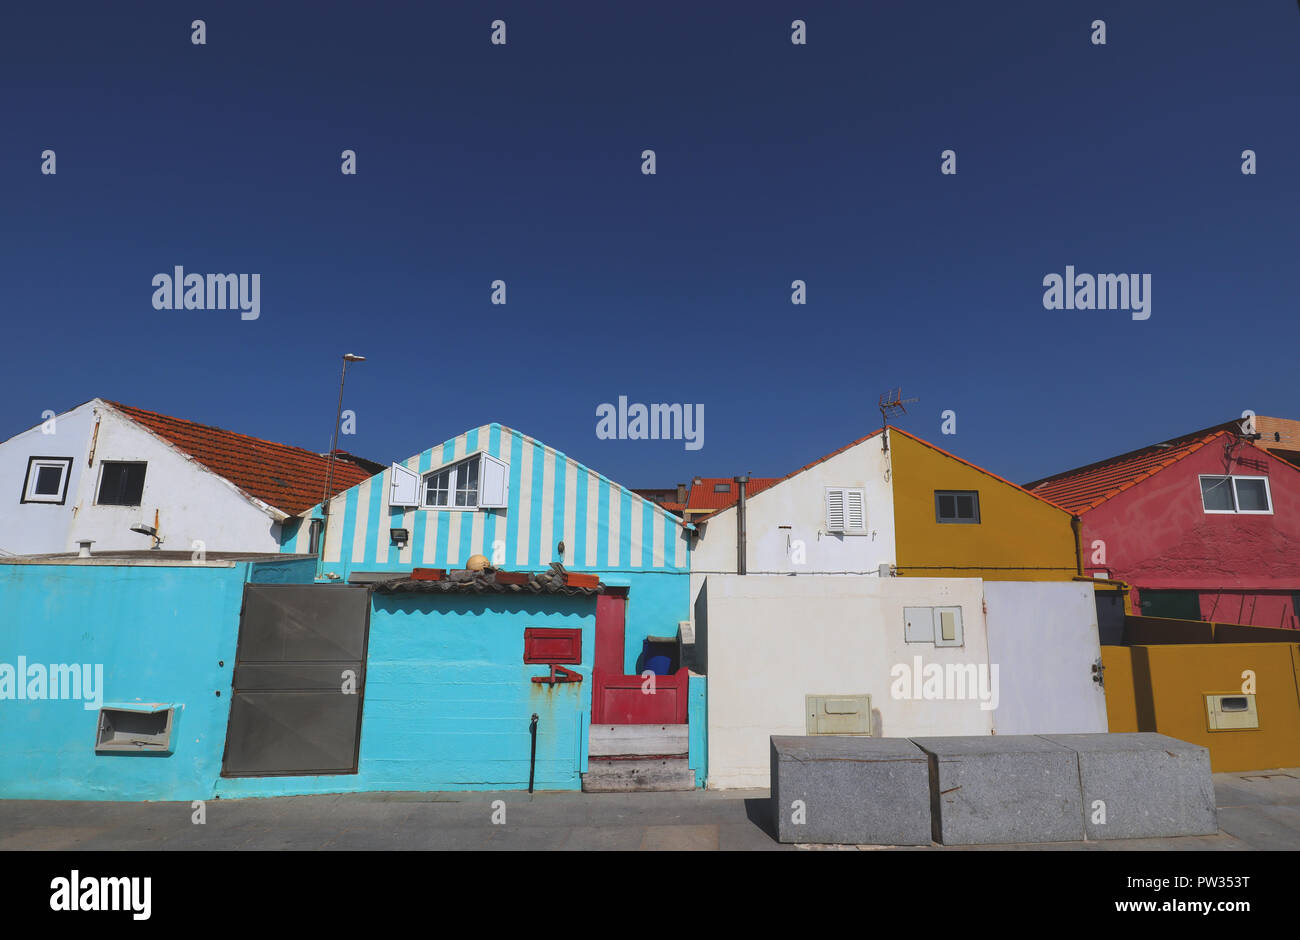 A collection of small colourful houses inhabited by fishermen along the sea front in Angeiras Portugal. Stock Photo